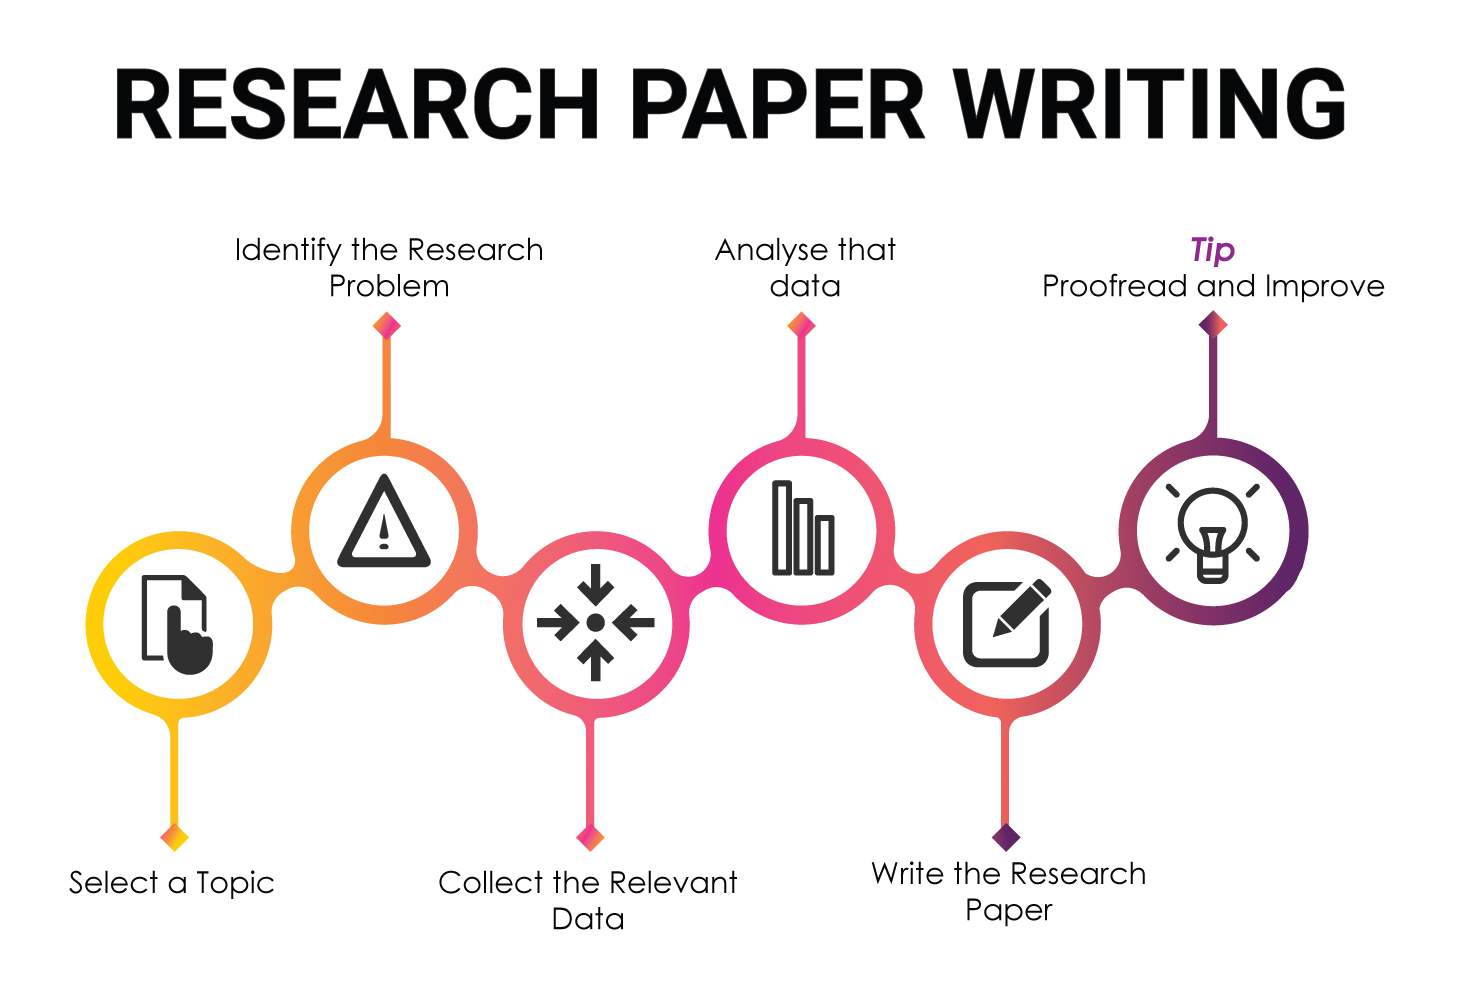 first step in writing a research report